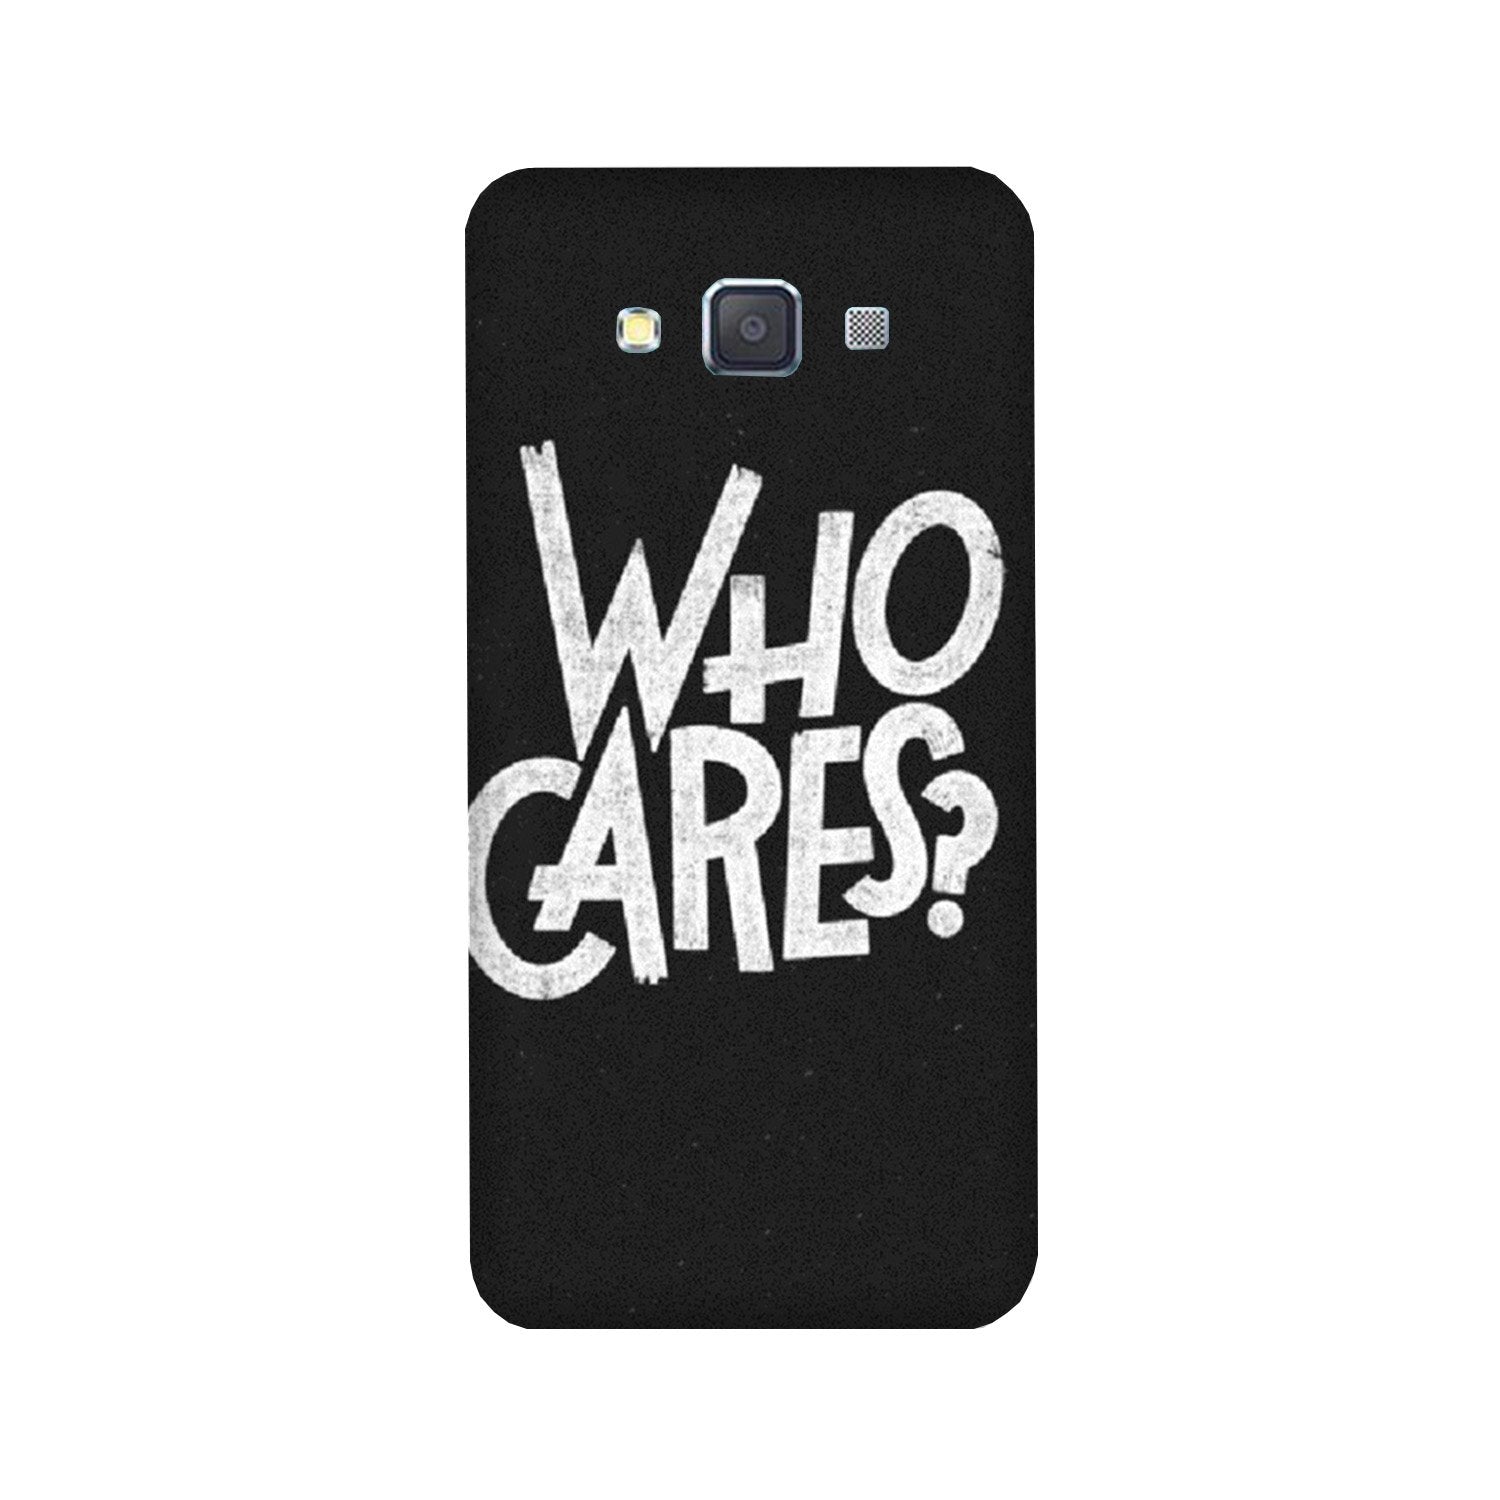 Who Cares Case for Galaxy J5 (2016)